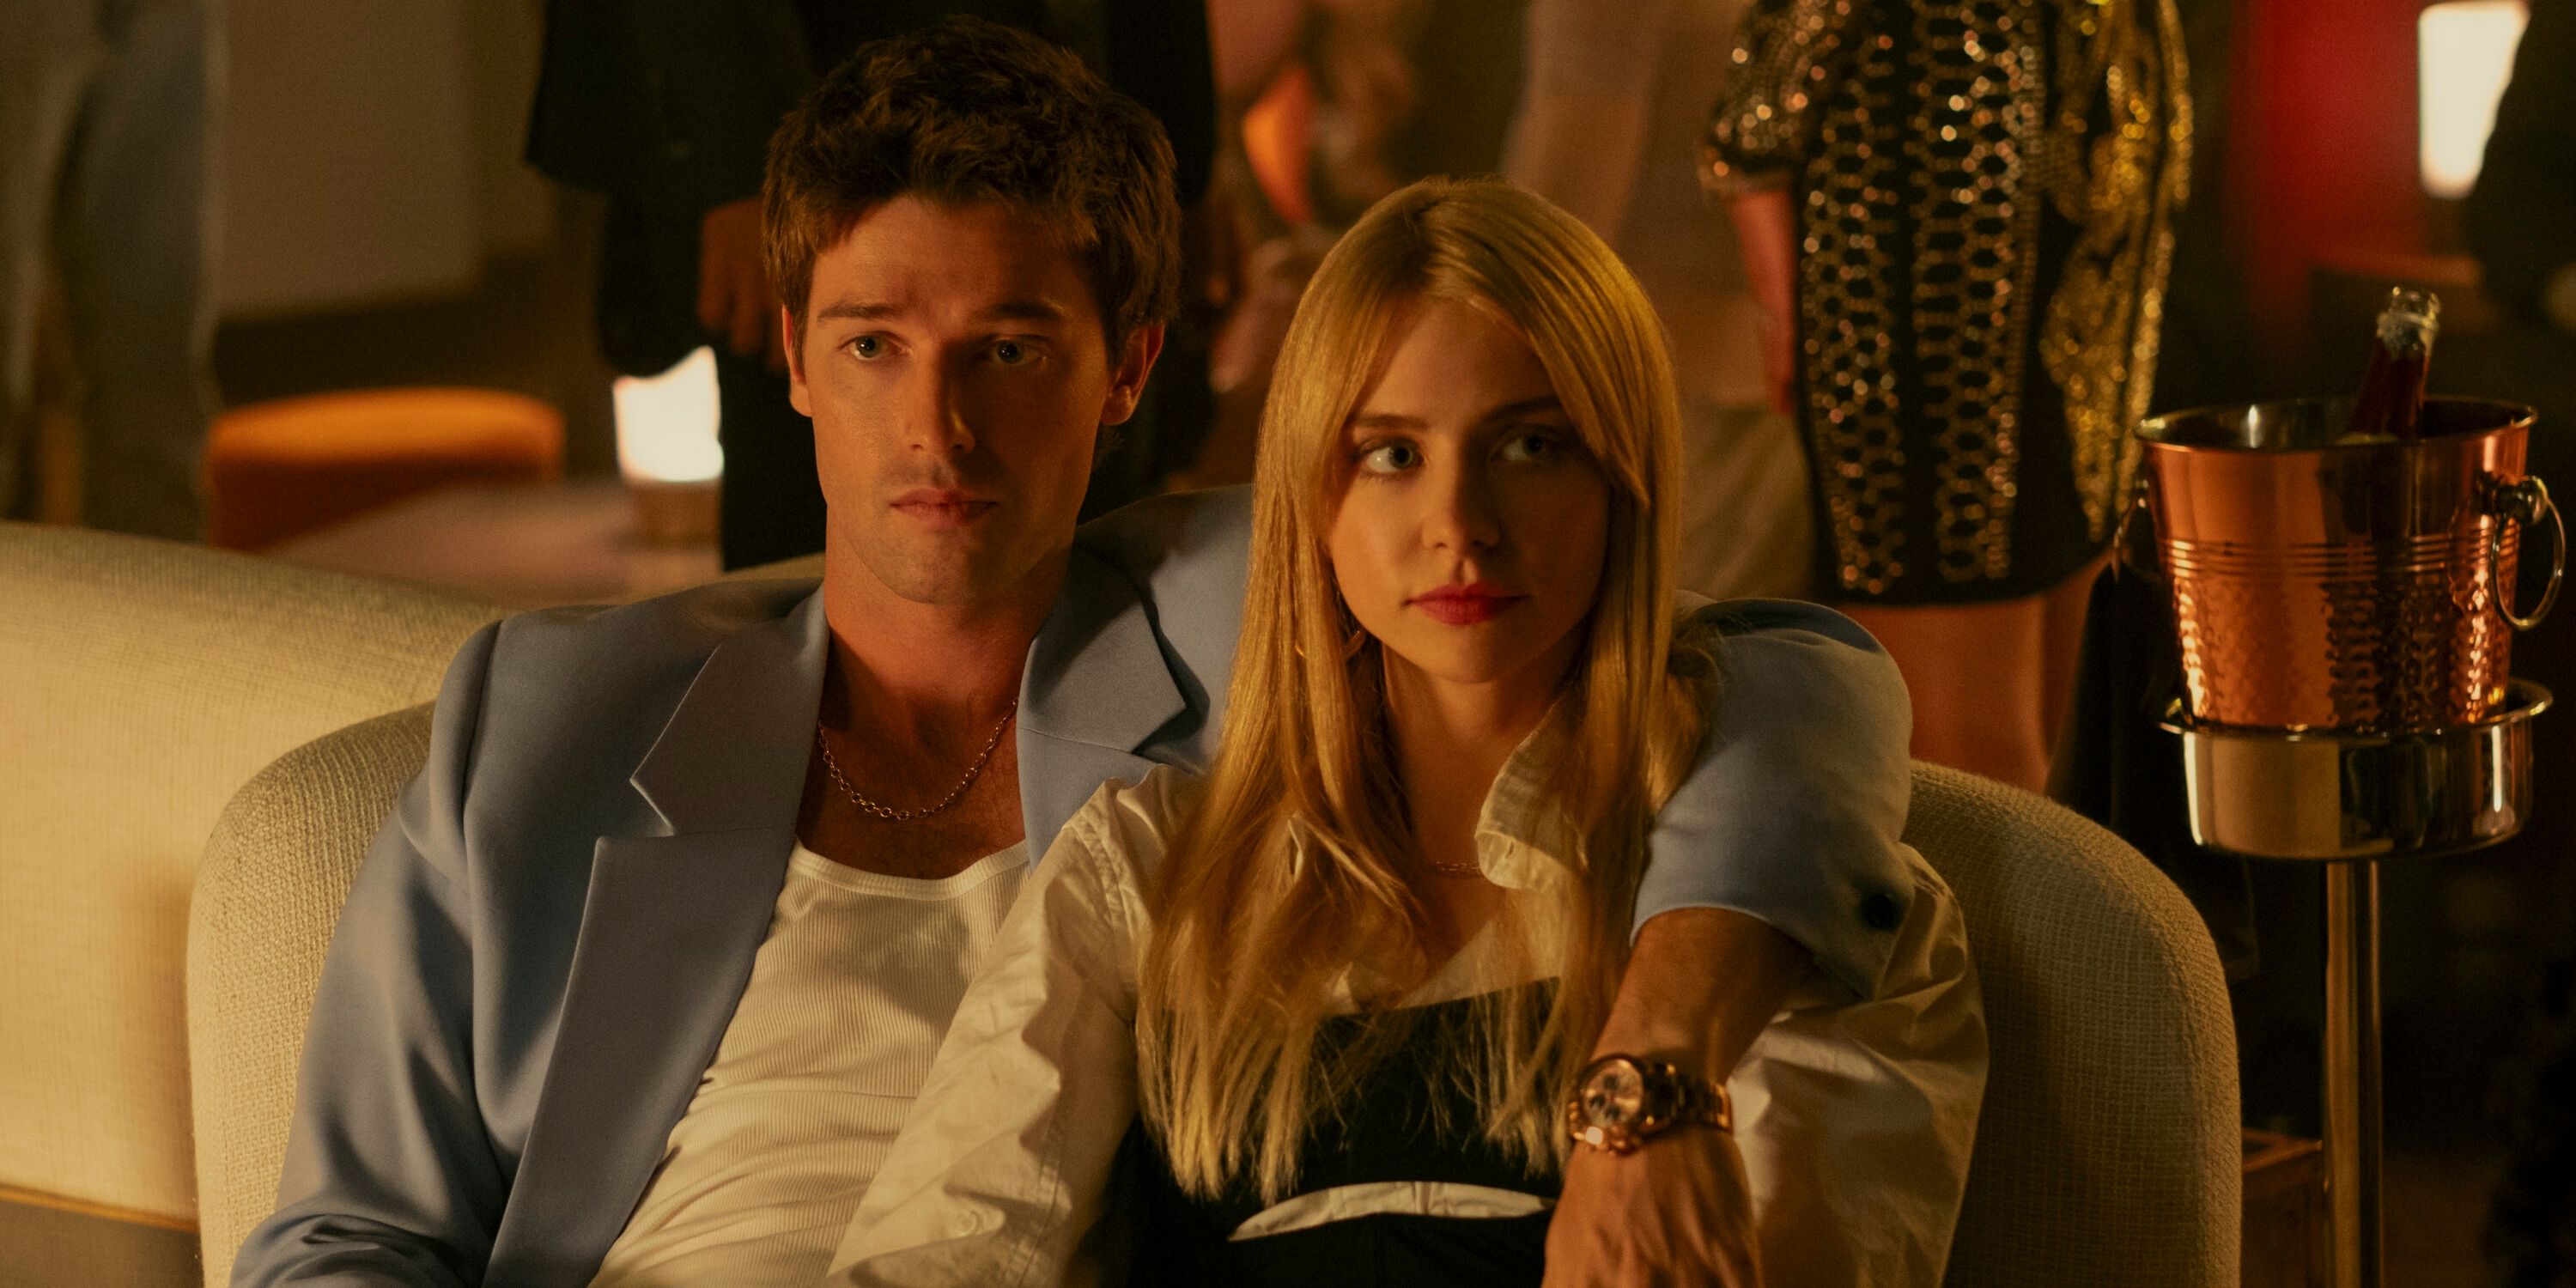 Maddie Phillips as Cate Dunlap and Patrick Schwarzenegger in Episode 1 of Season 1 of Gen V